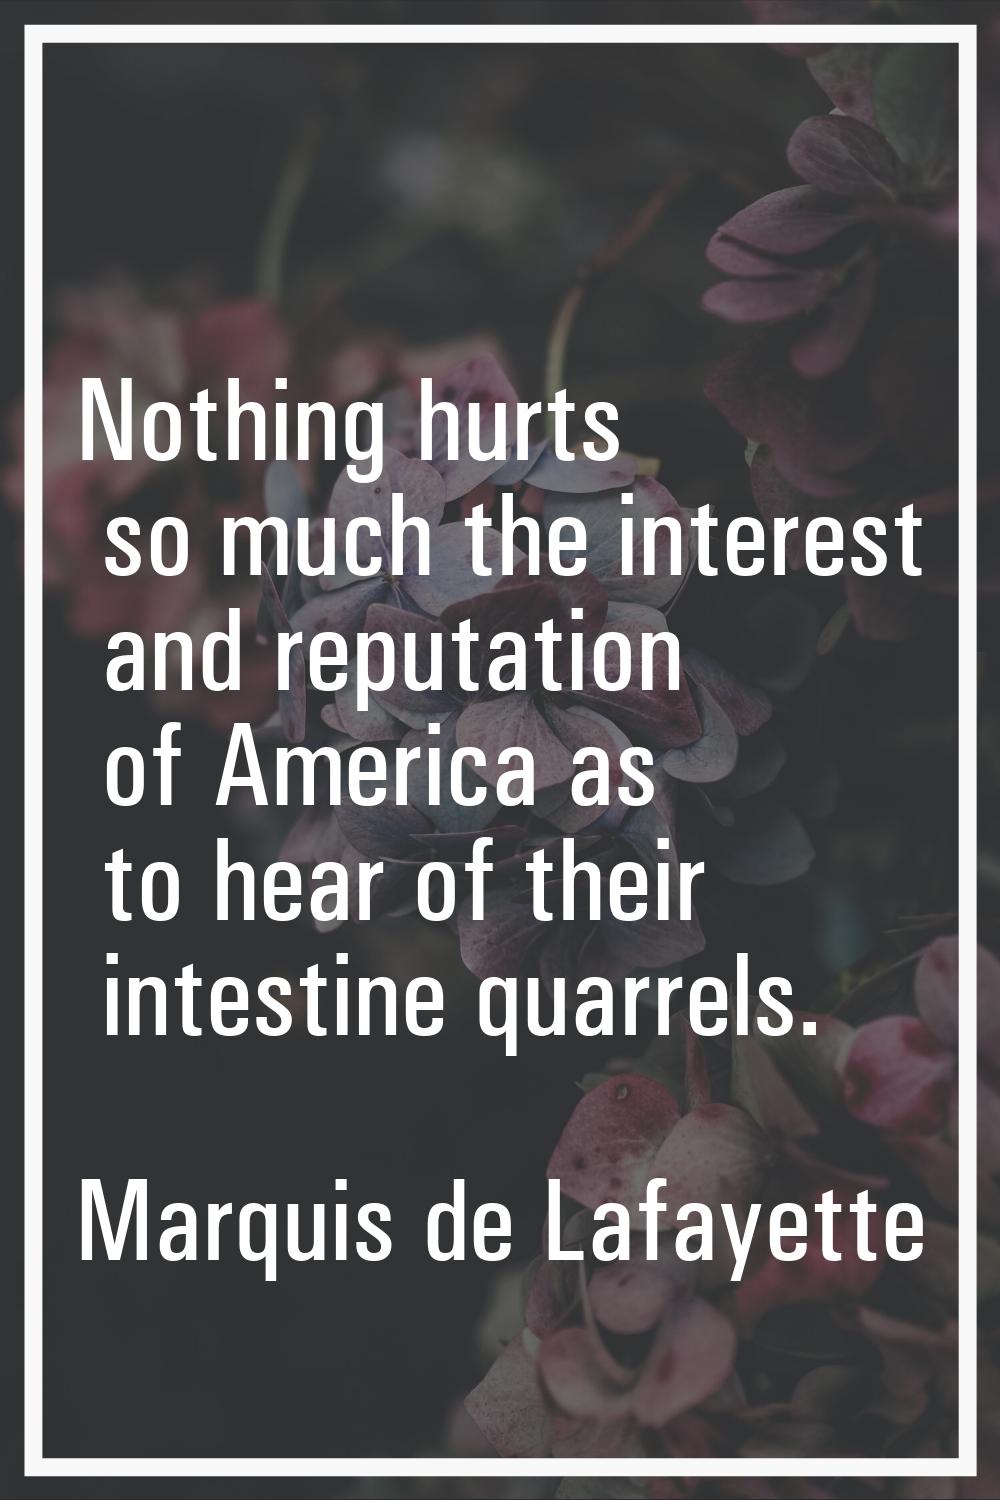 Nothing hurts so much the interest and reputation of America as to hear of their intestine quarrels